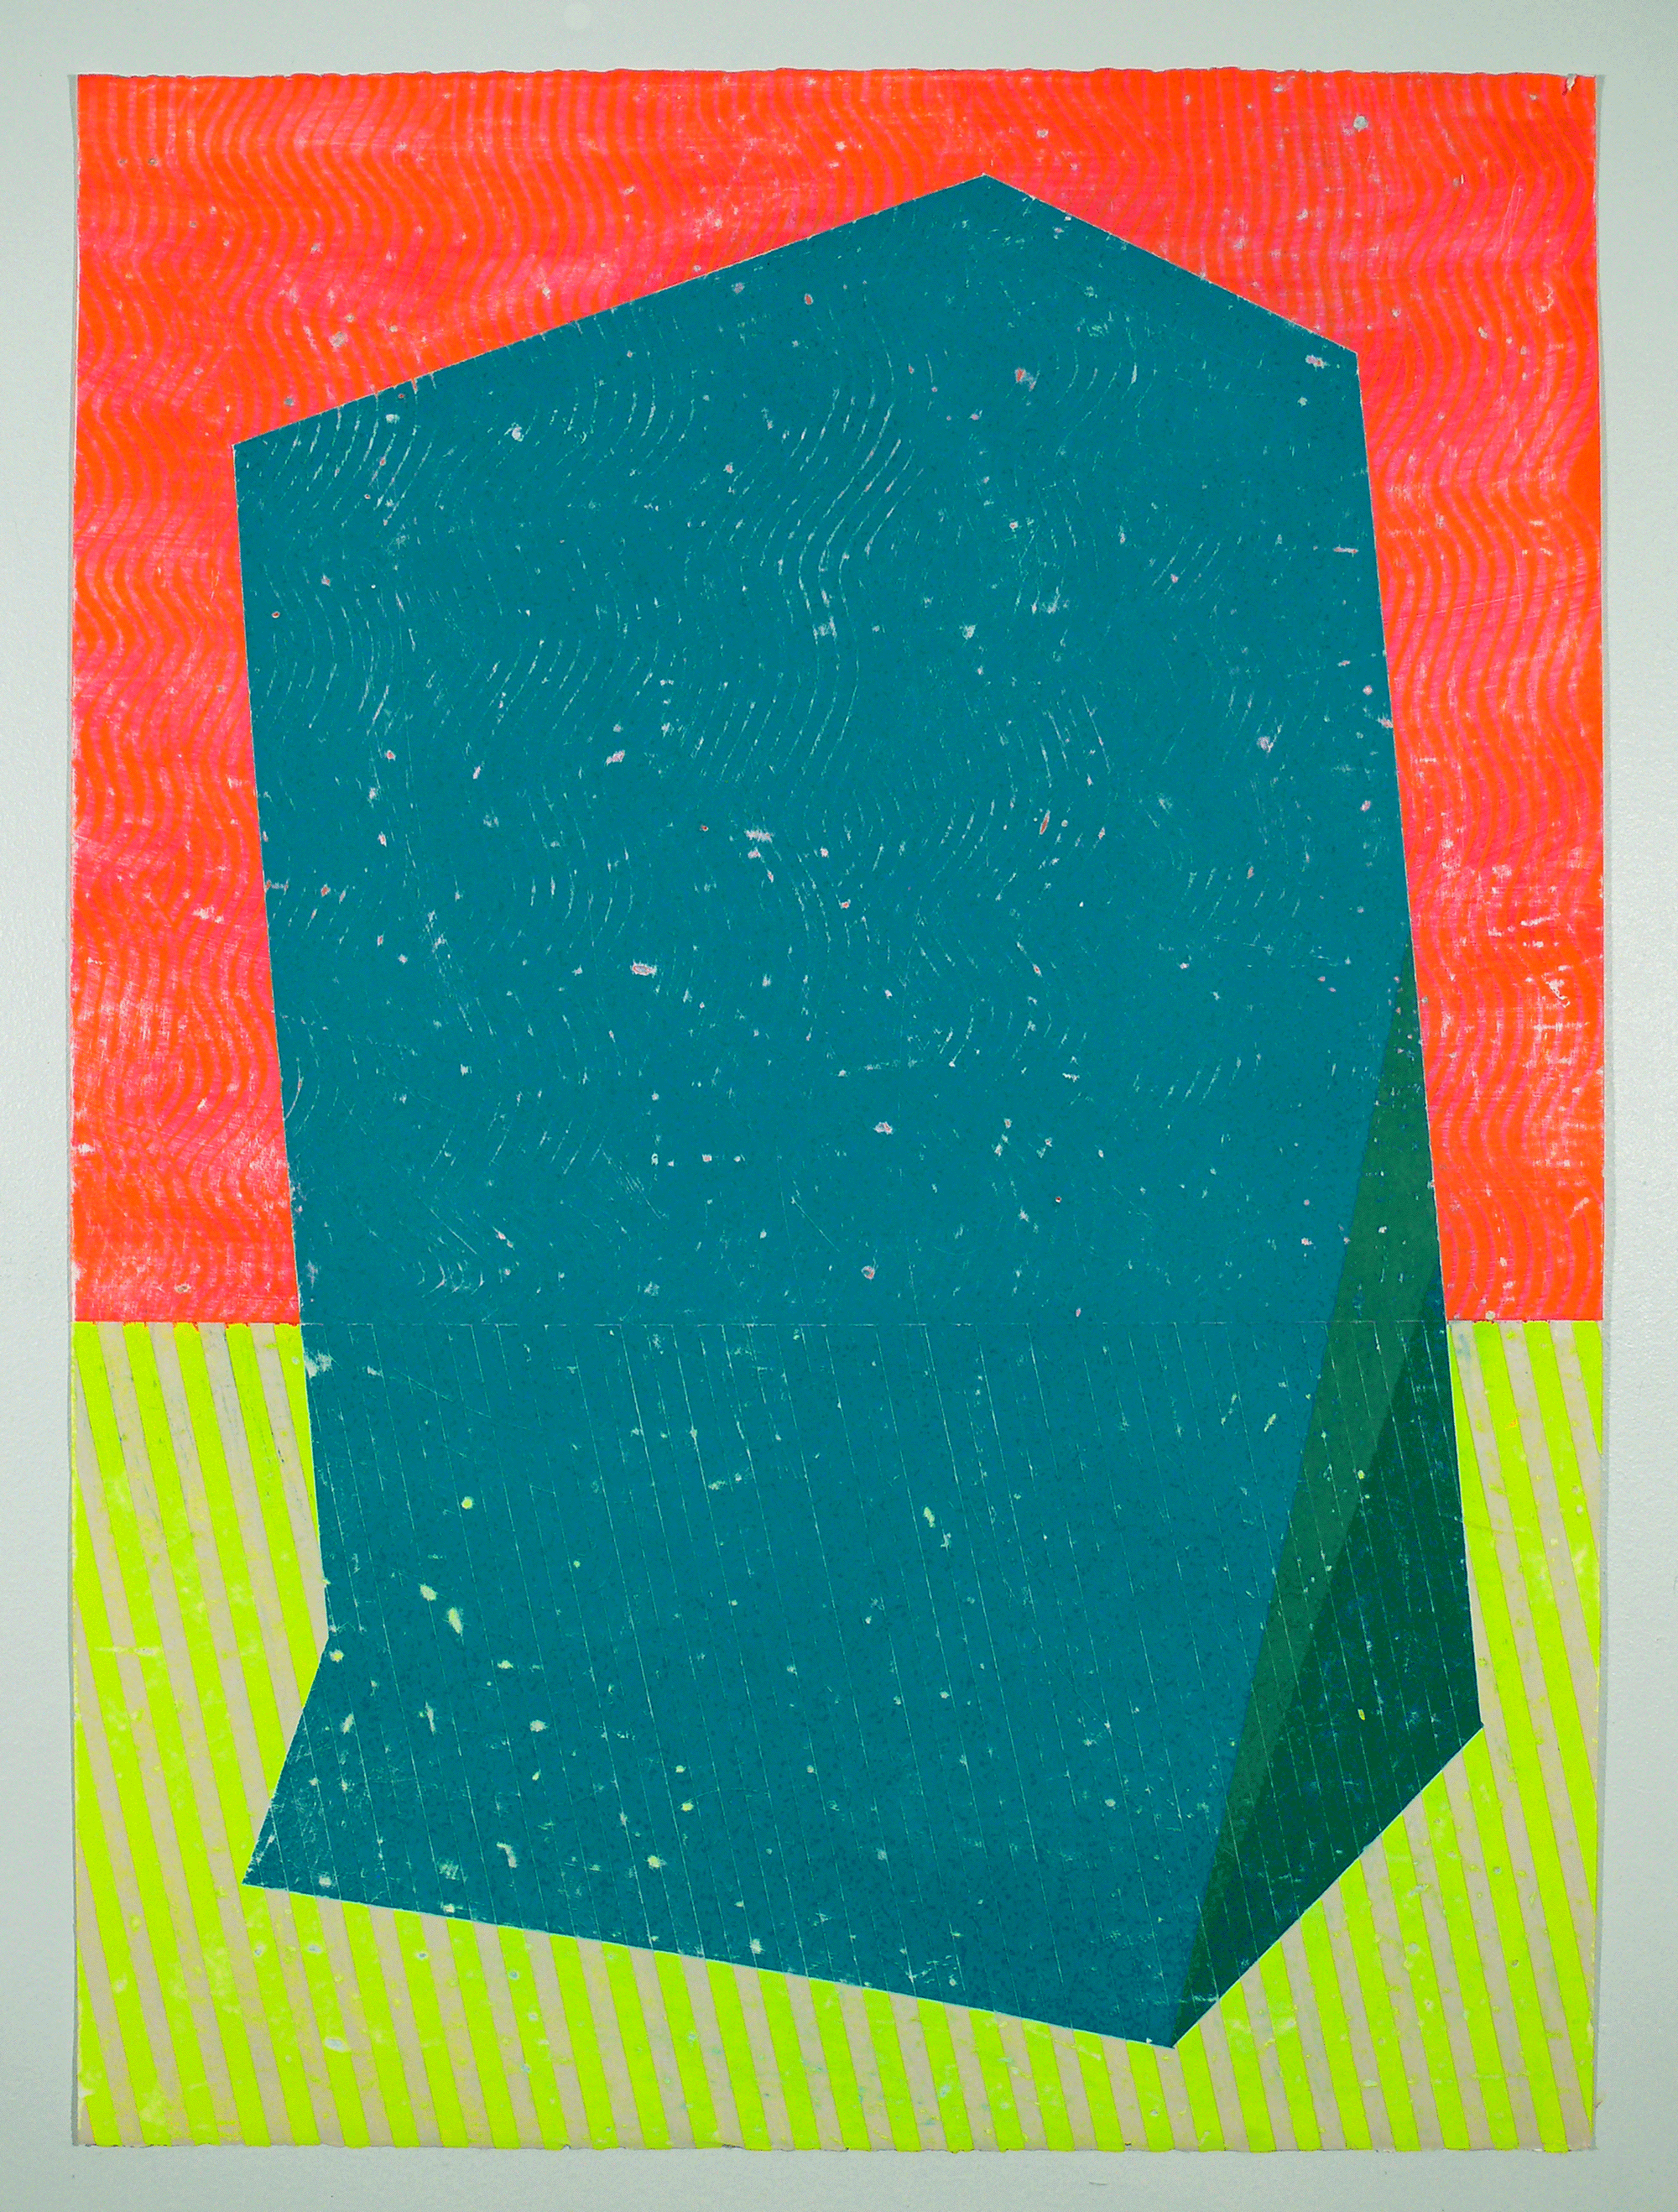  NY14#22,&nbsp; 22" x 30", mixed mediums on paper, 2014   available at Etsy  This is part of a limited series, paintings NY14#18-22 